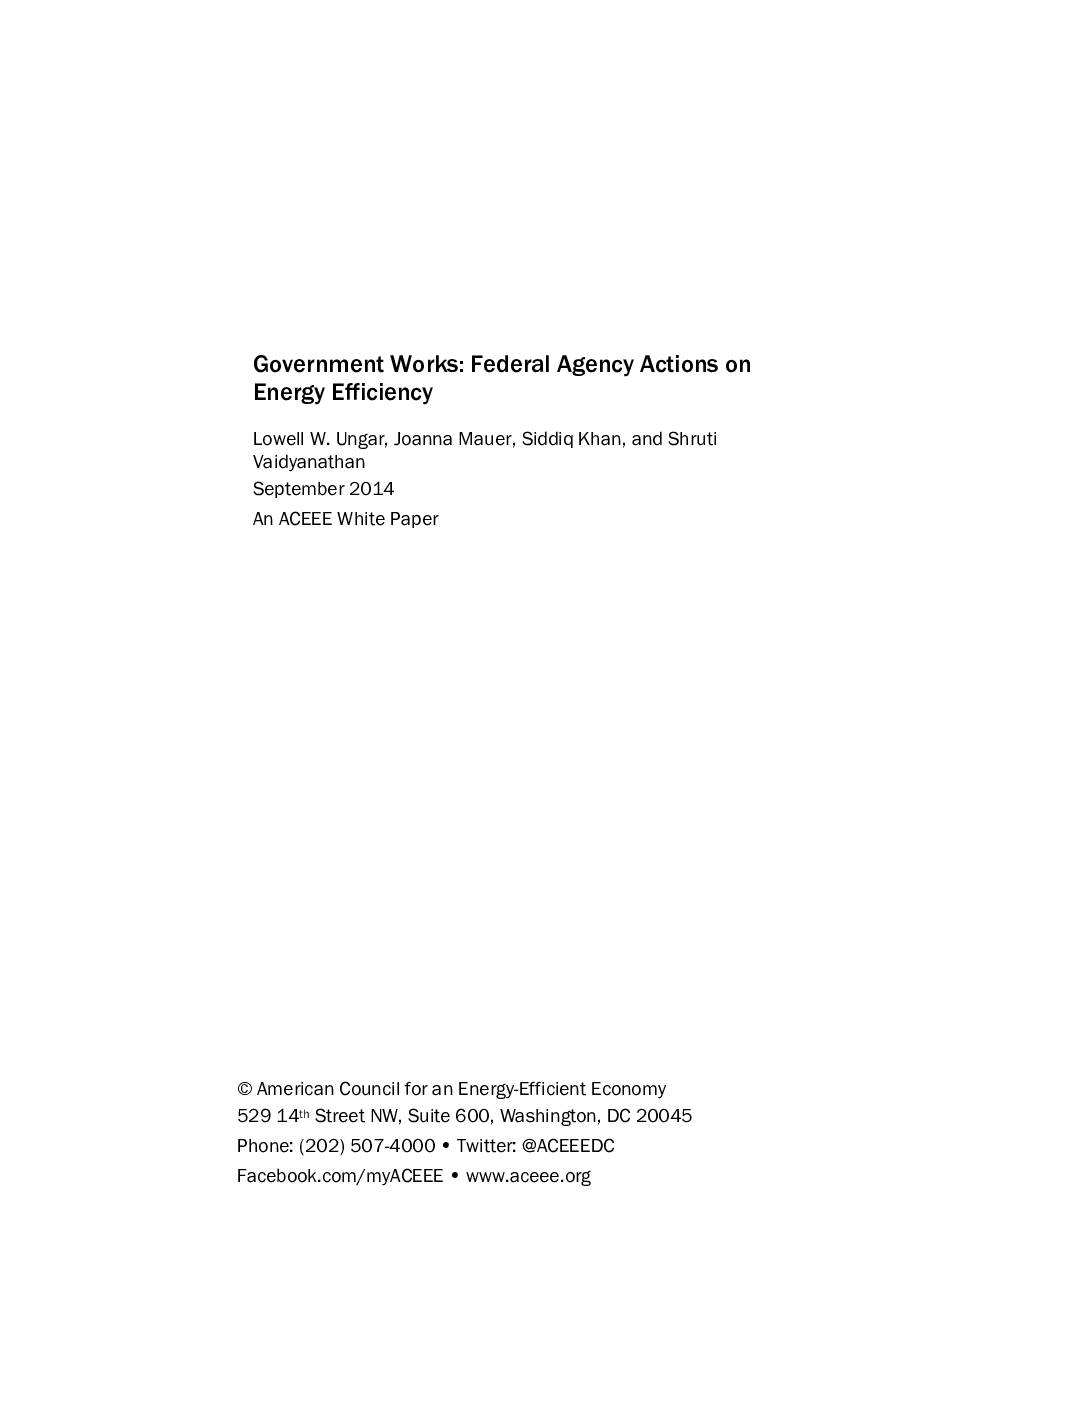 Government Works: Federal Agency Actions on Energy Efficiency